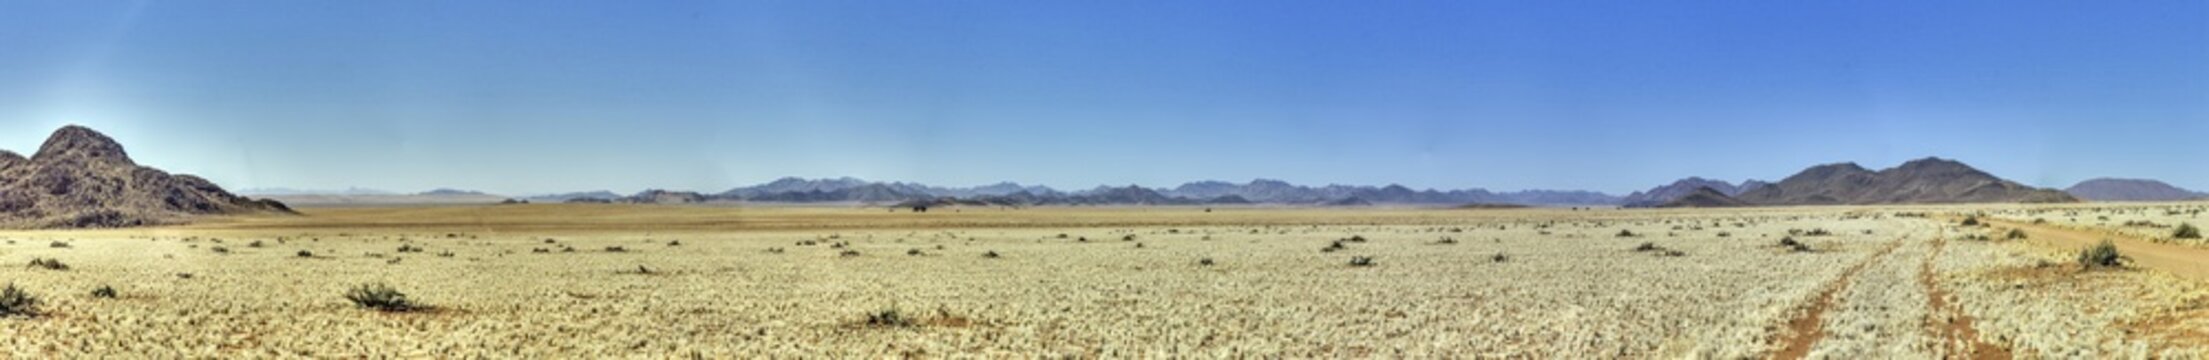 Picture of the unique landscape of the Tiras Mountains on the edge of the Namib Desert in Namibia